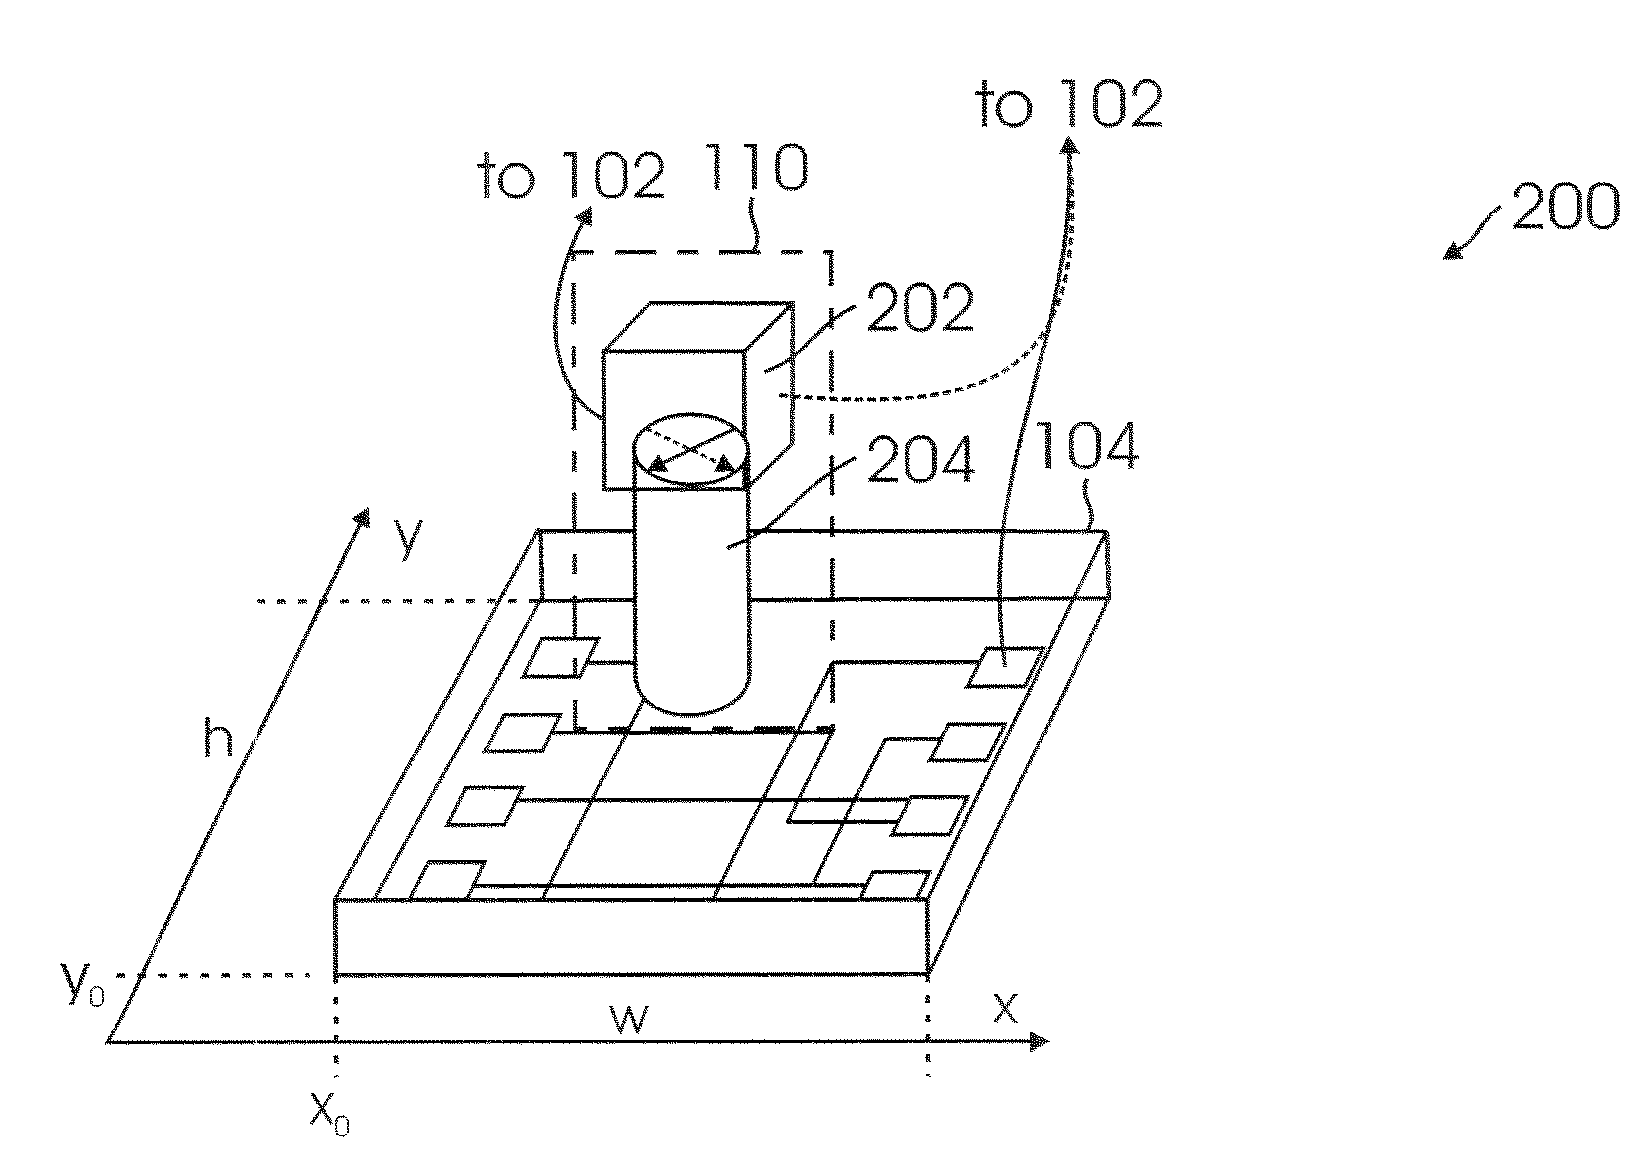 Method for characterizing integrated circuits for identification or security purposes